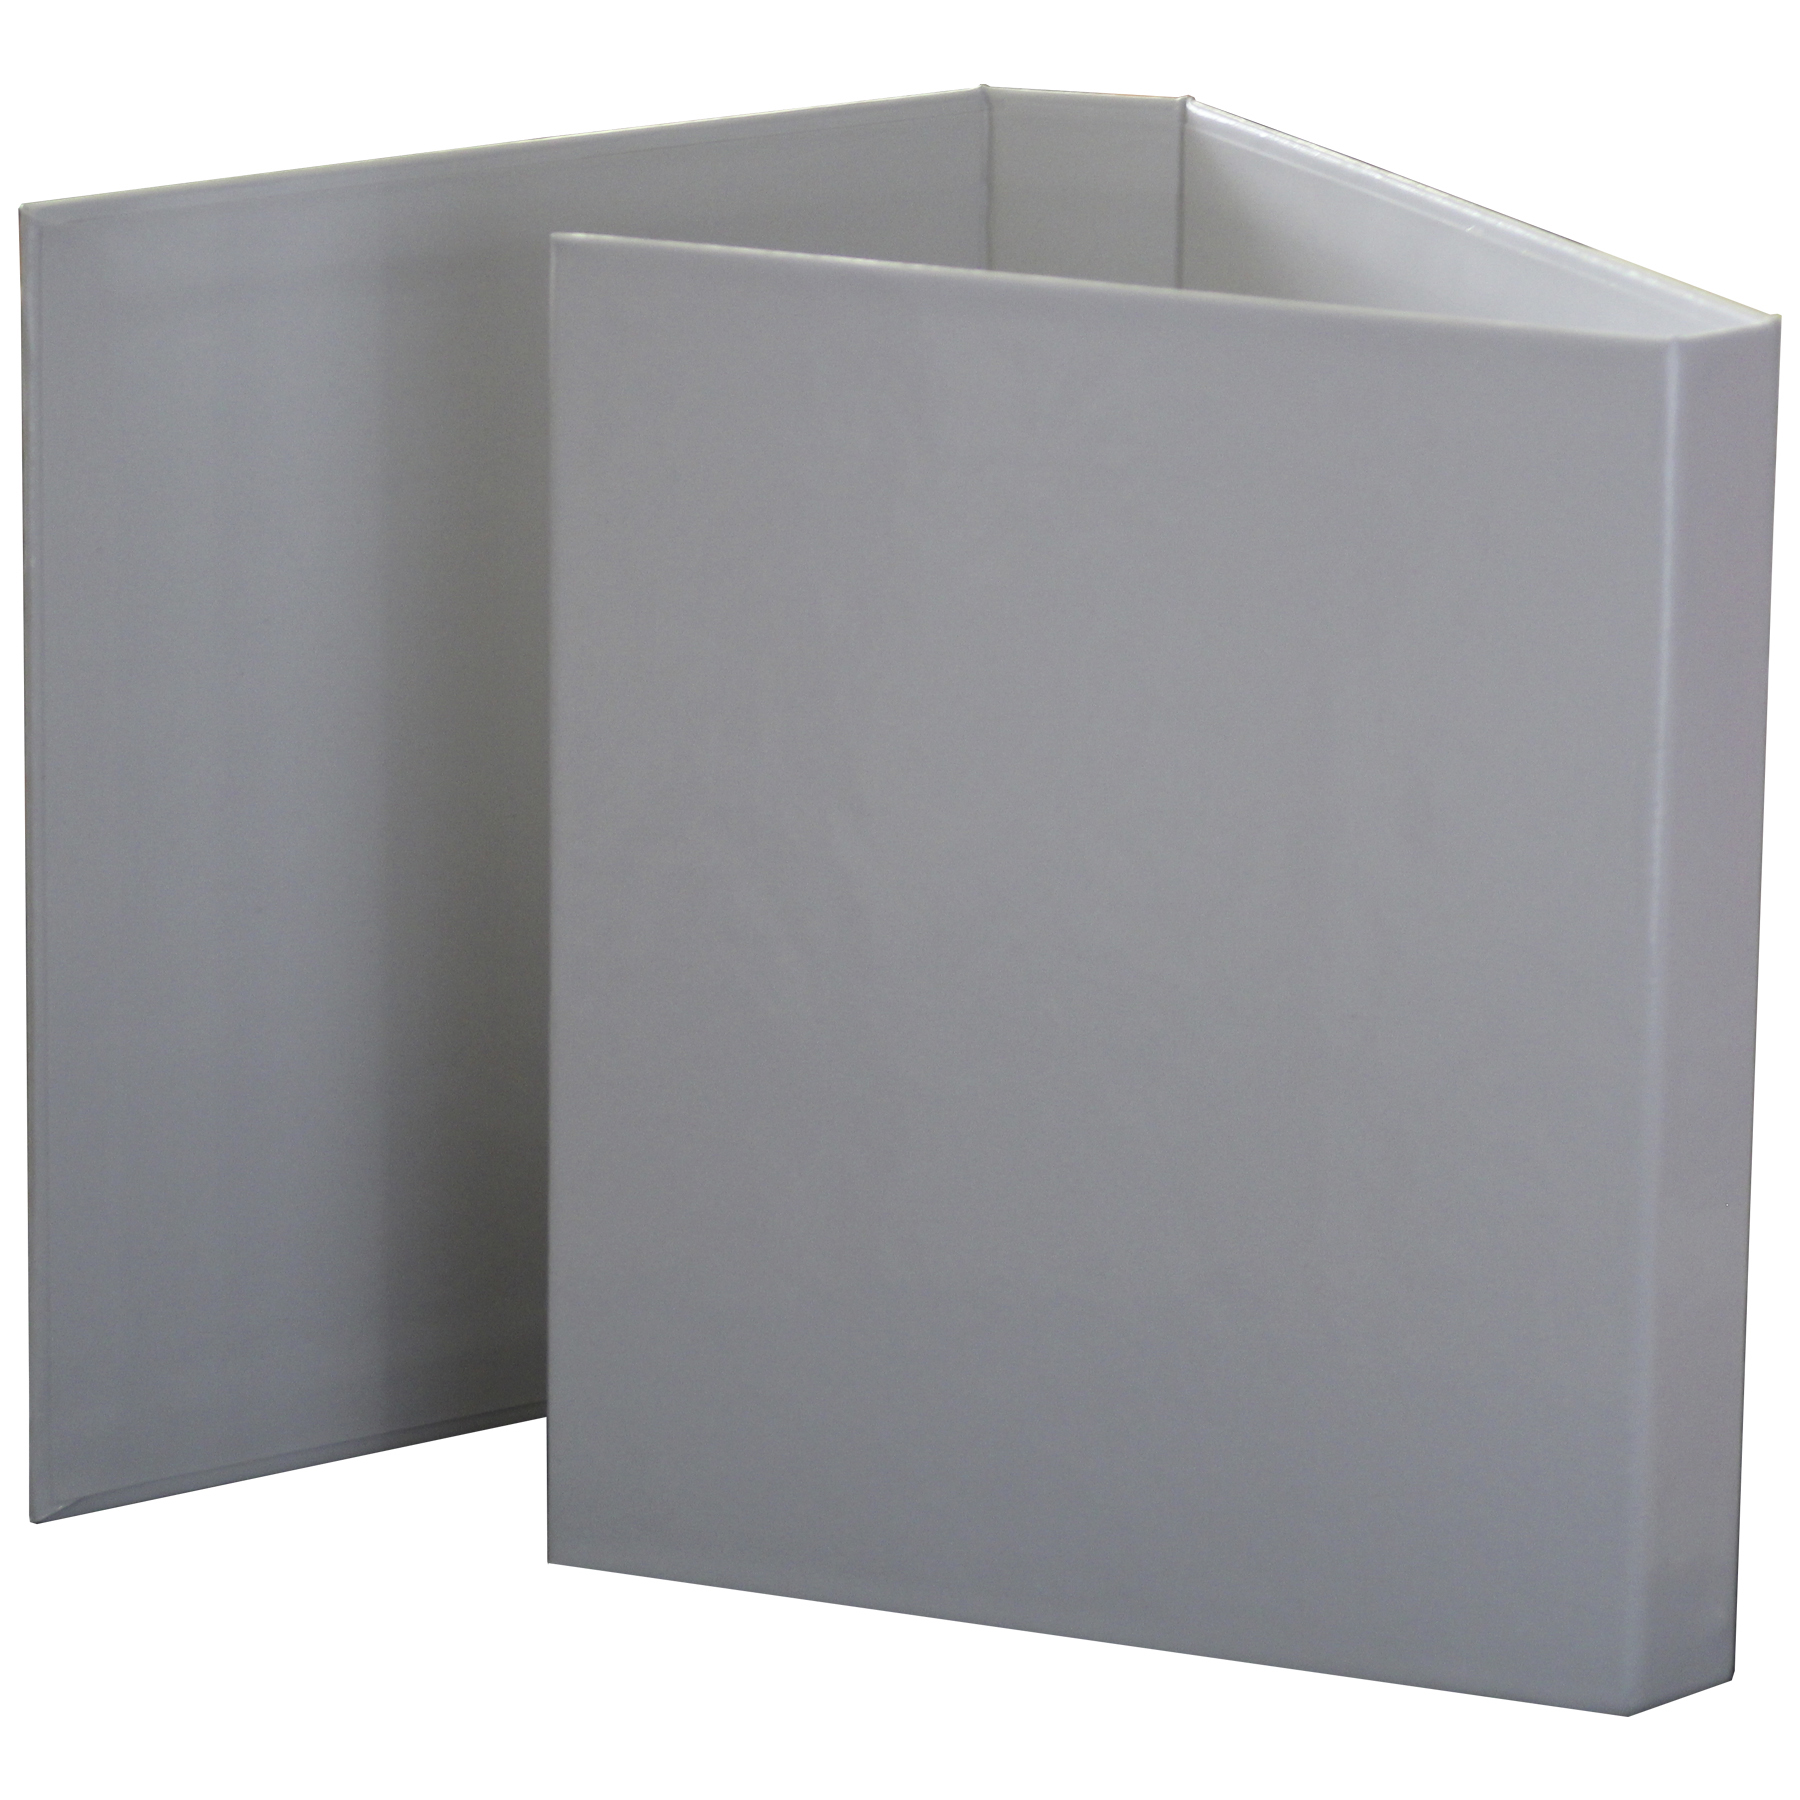 Architectural Binder Blank White for Tile Stone Marble Wood Samples Easy to Customize